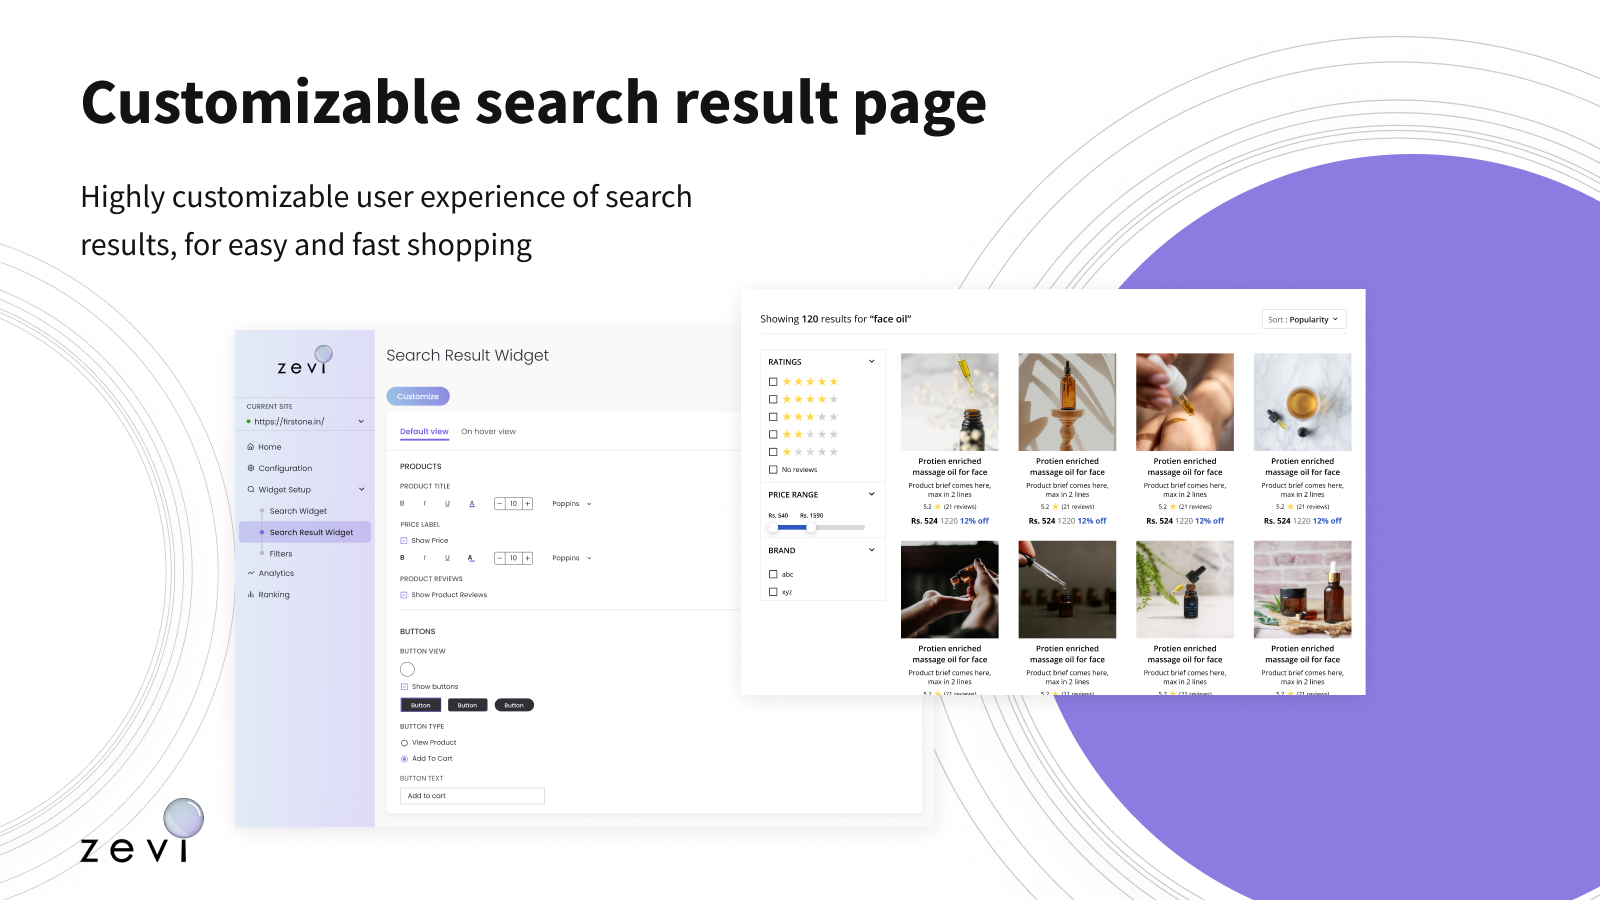 User Interface on the search result page is customizable